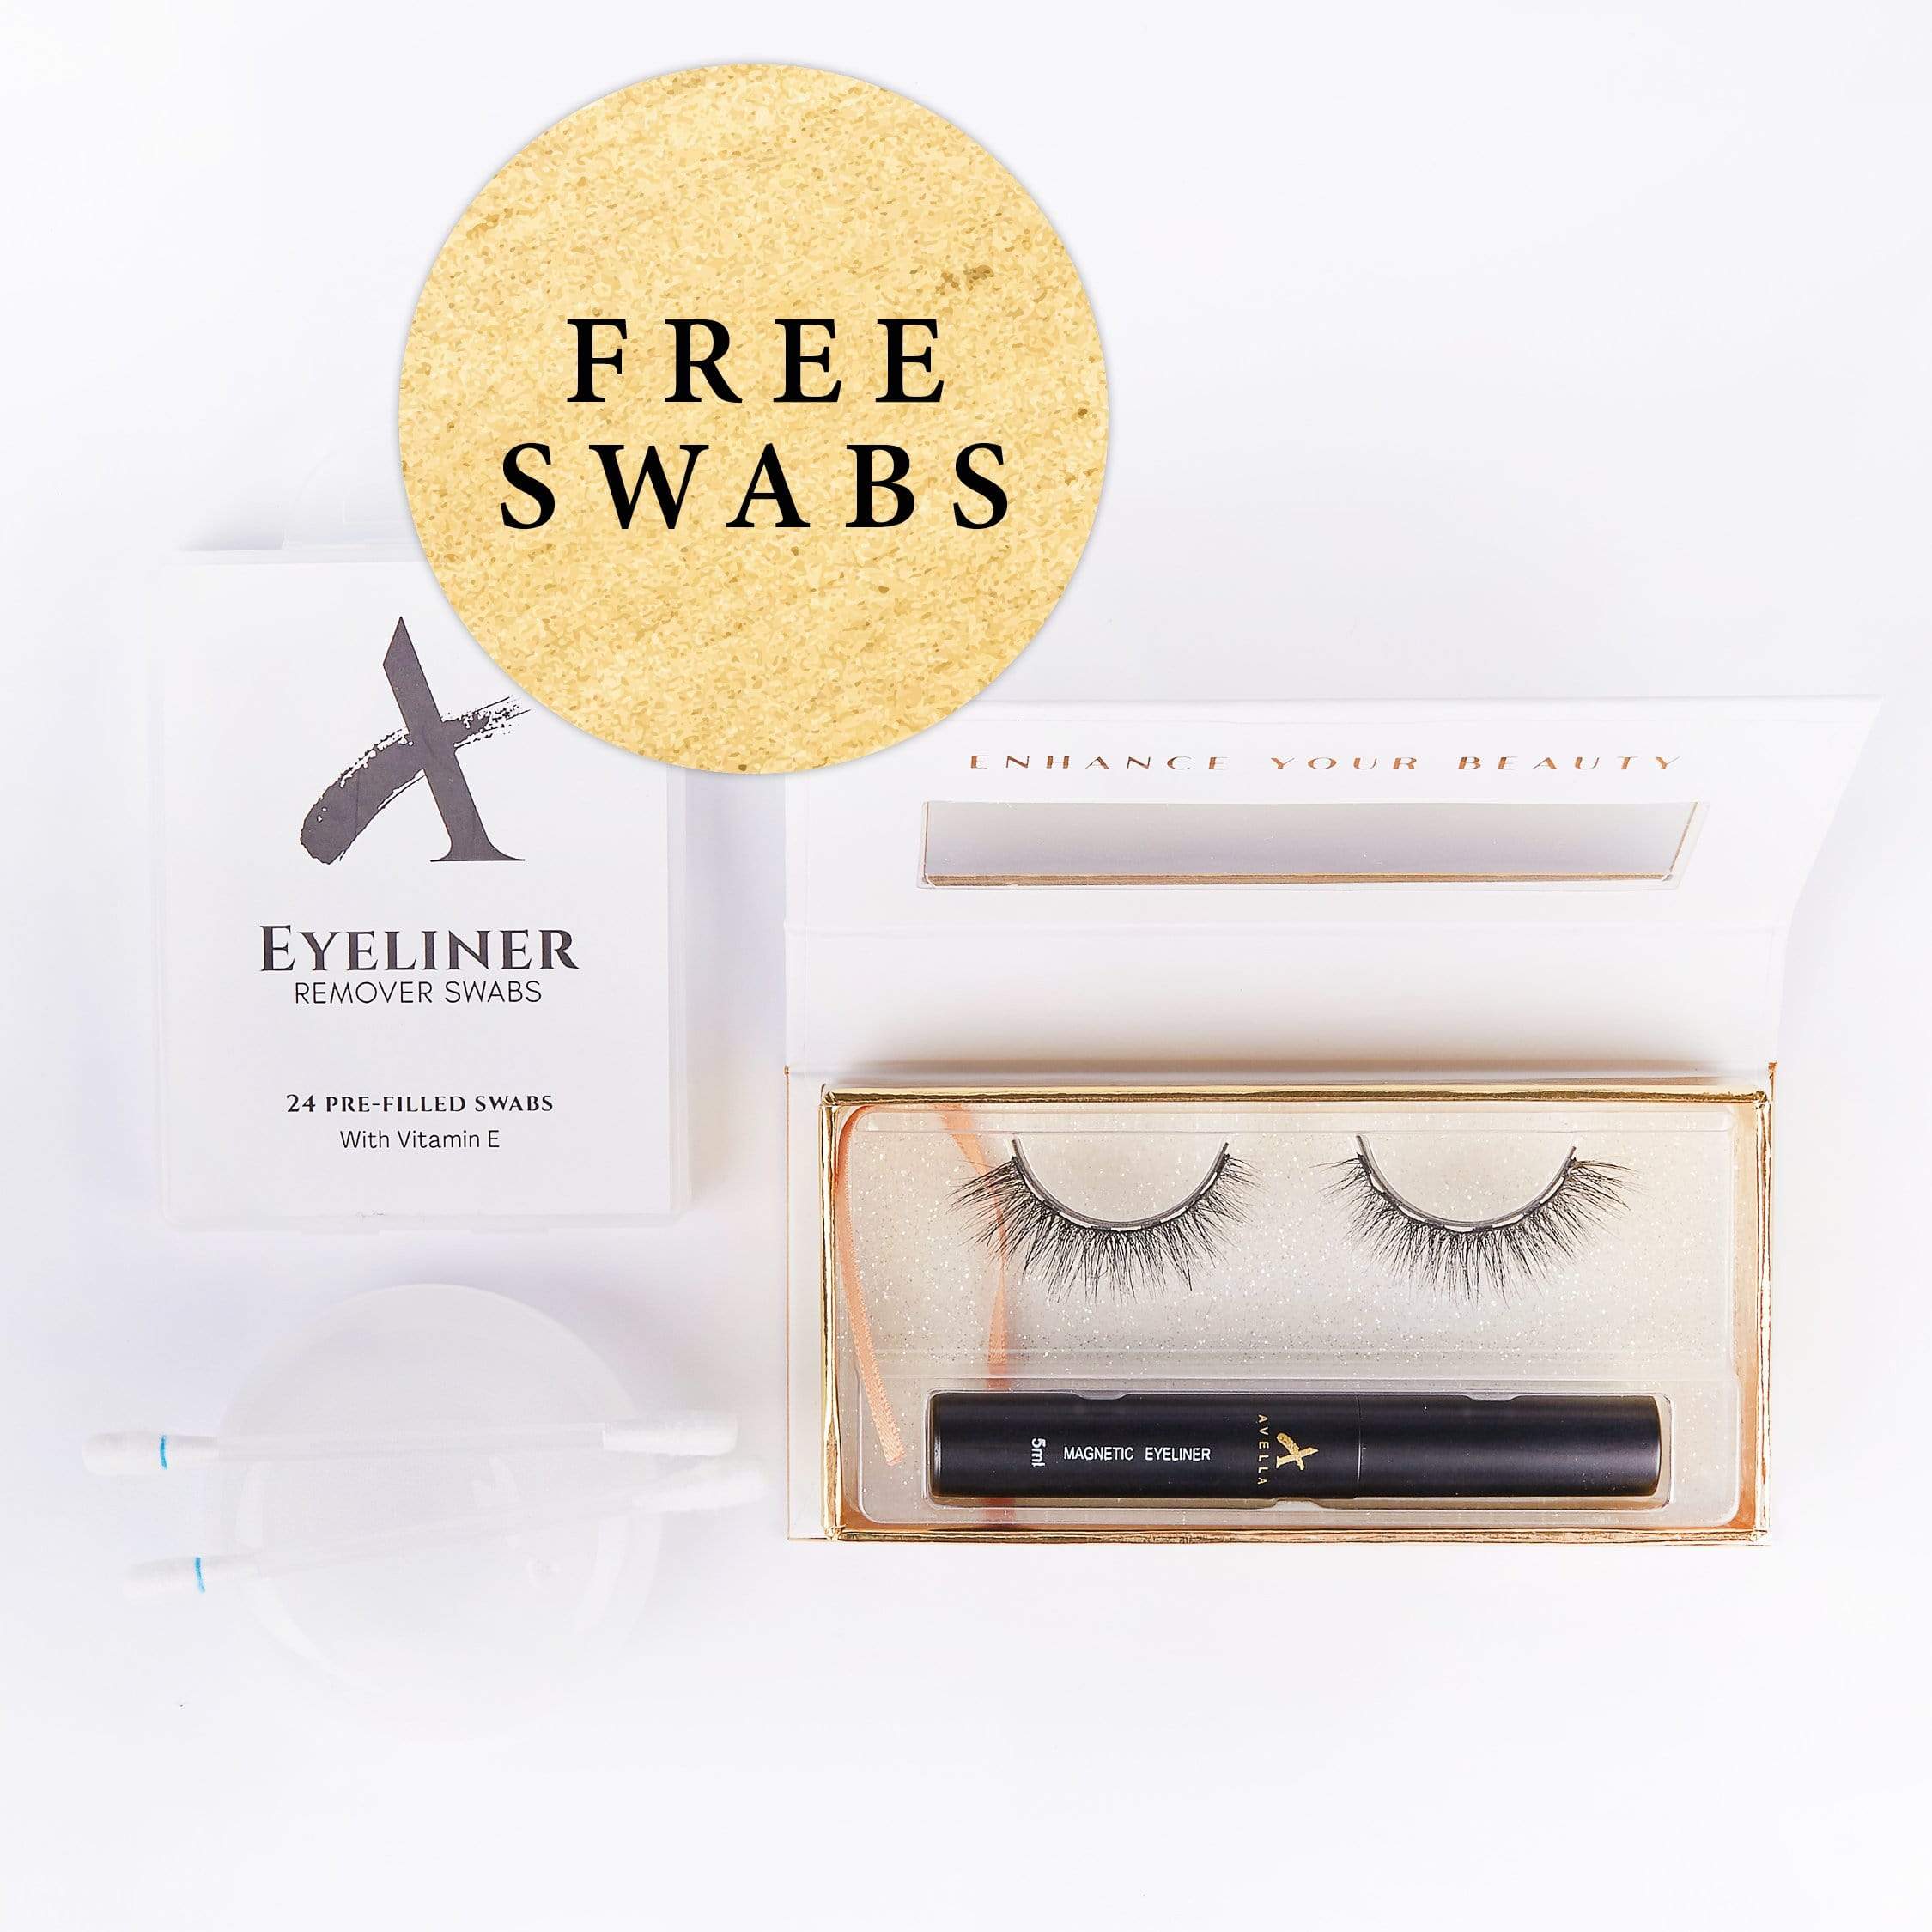 Avella Beauty, ATTRACT Magnetic Lash Kit, Luxury 3D Lashes, Avella Beauty - Expert Designed Magnetic Lashes & Beauty products